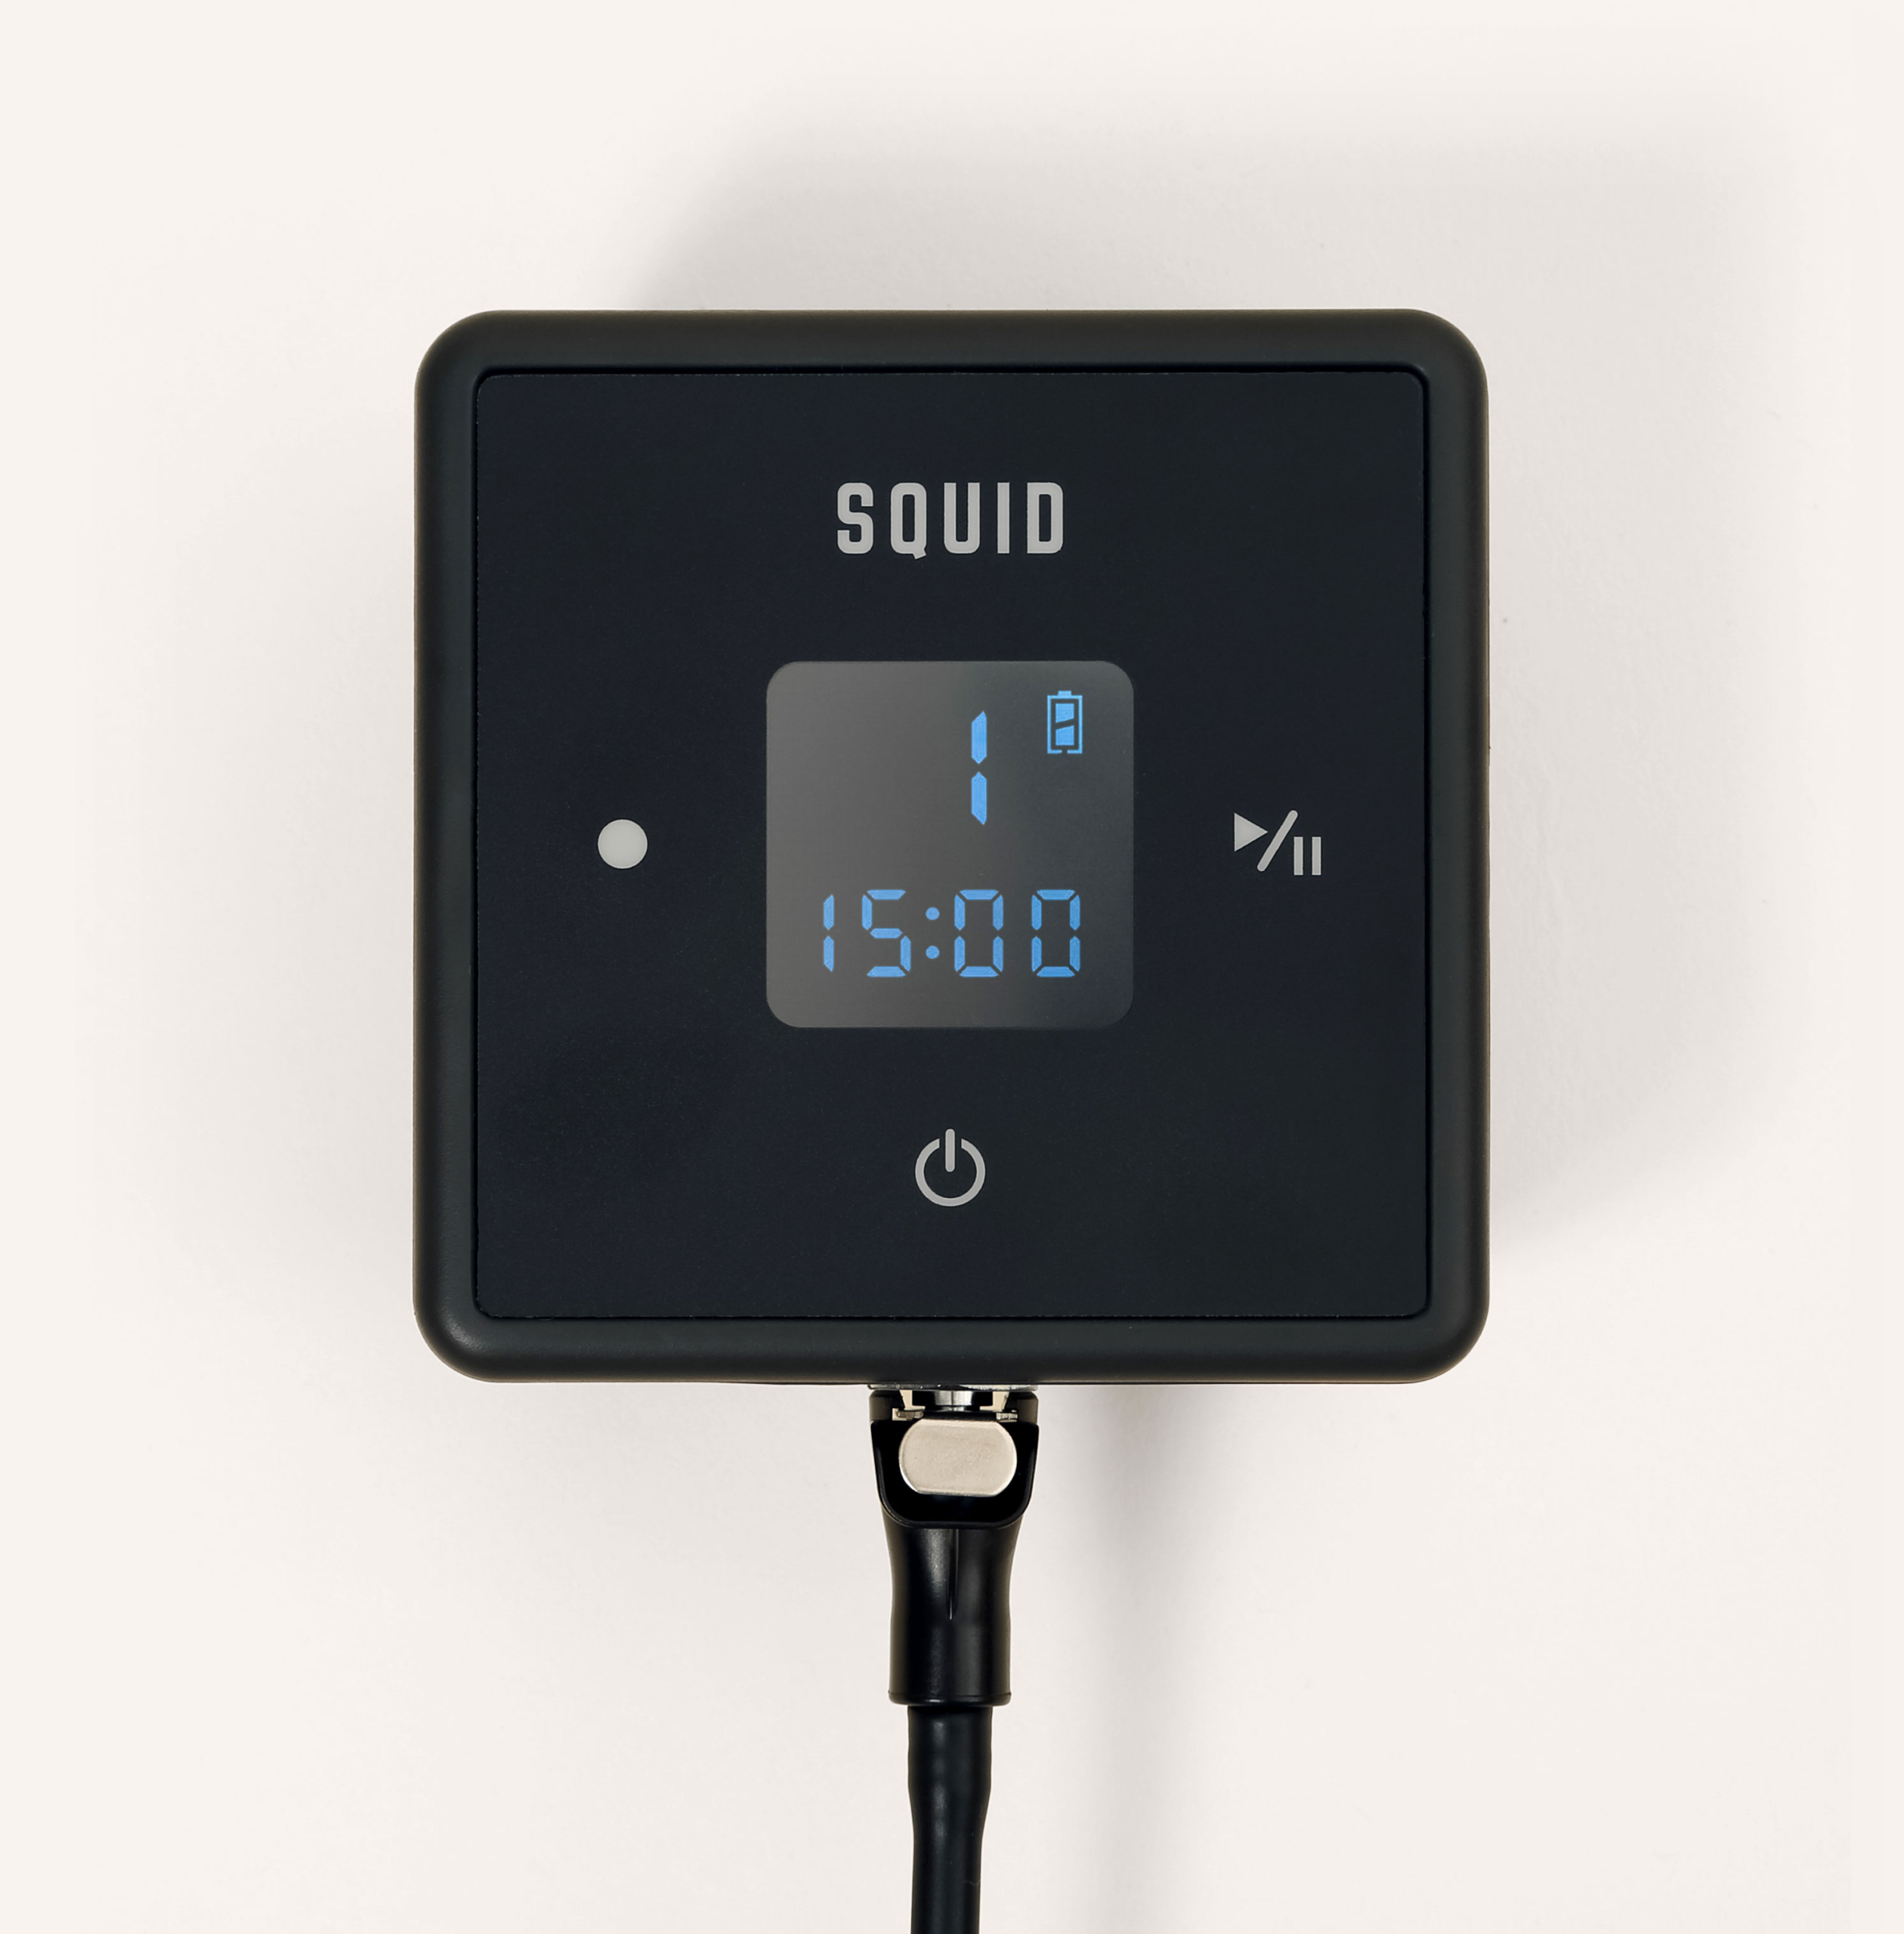 A square black device with a digital display.